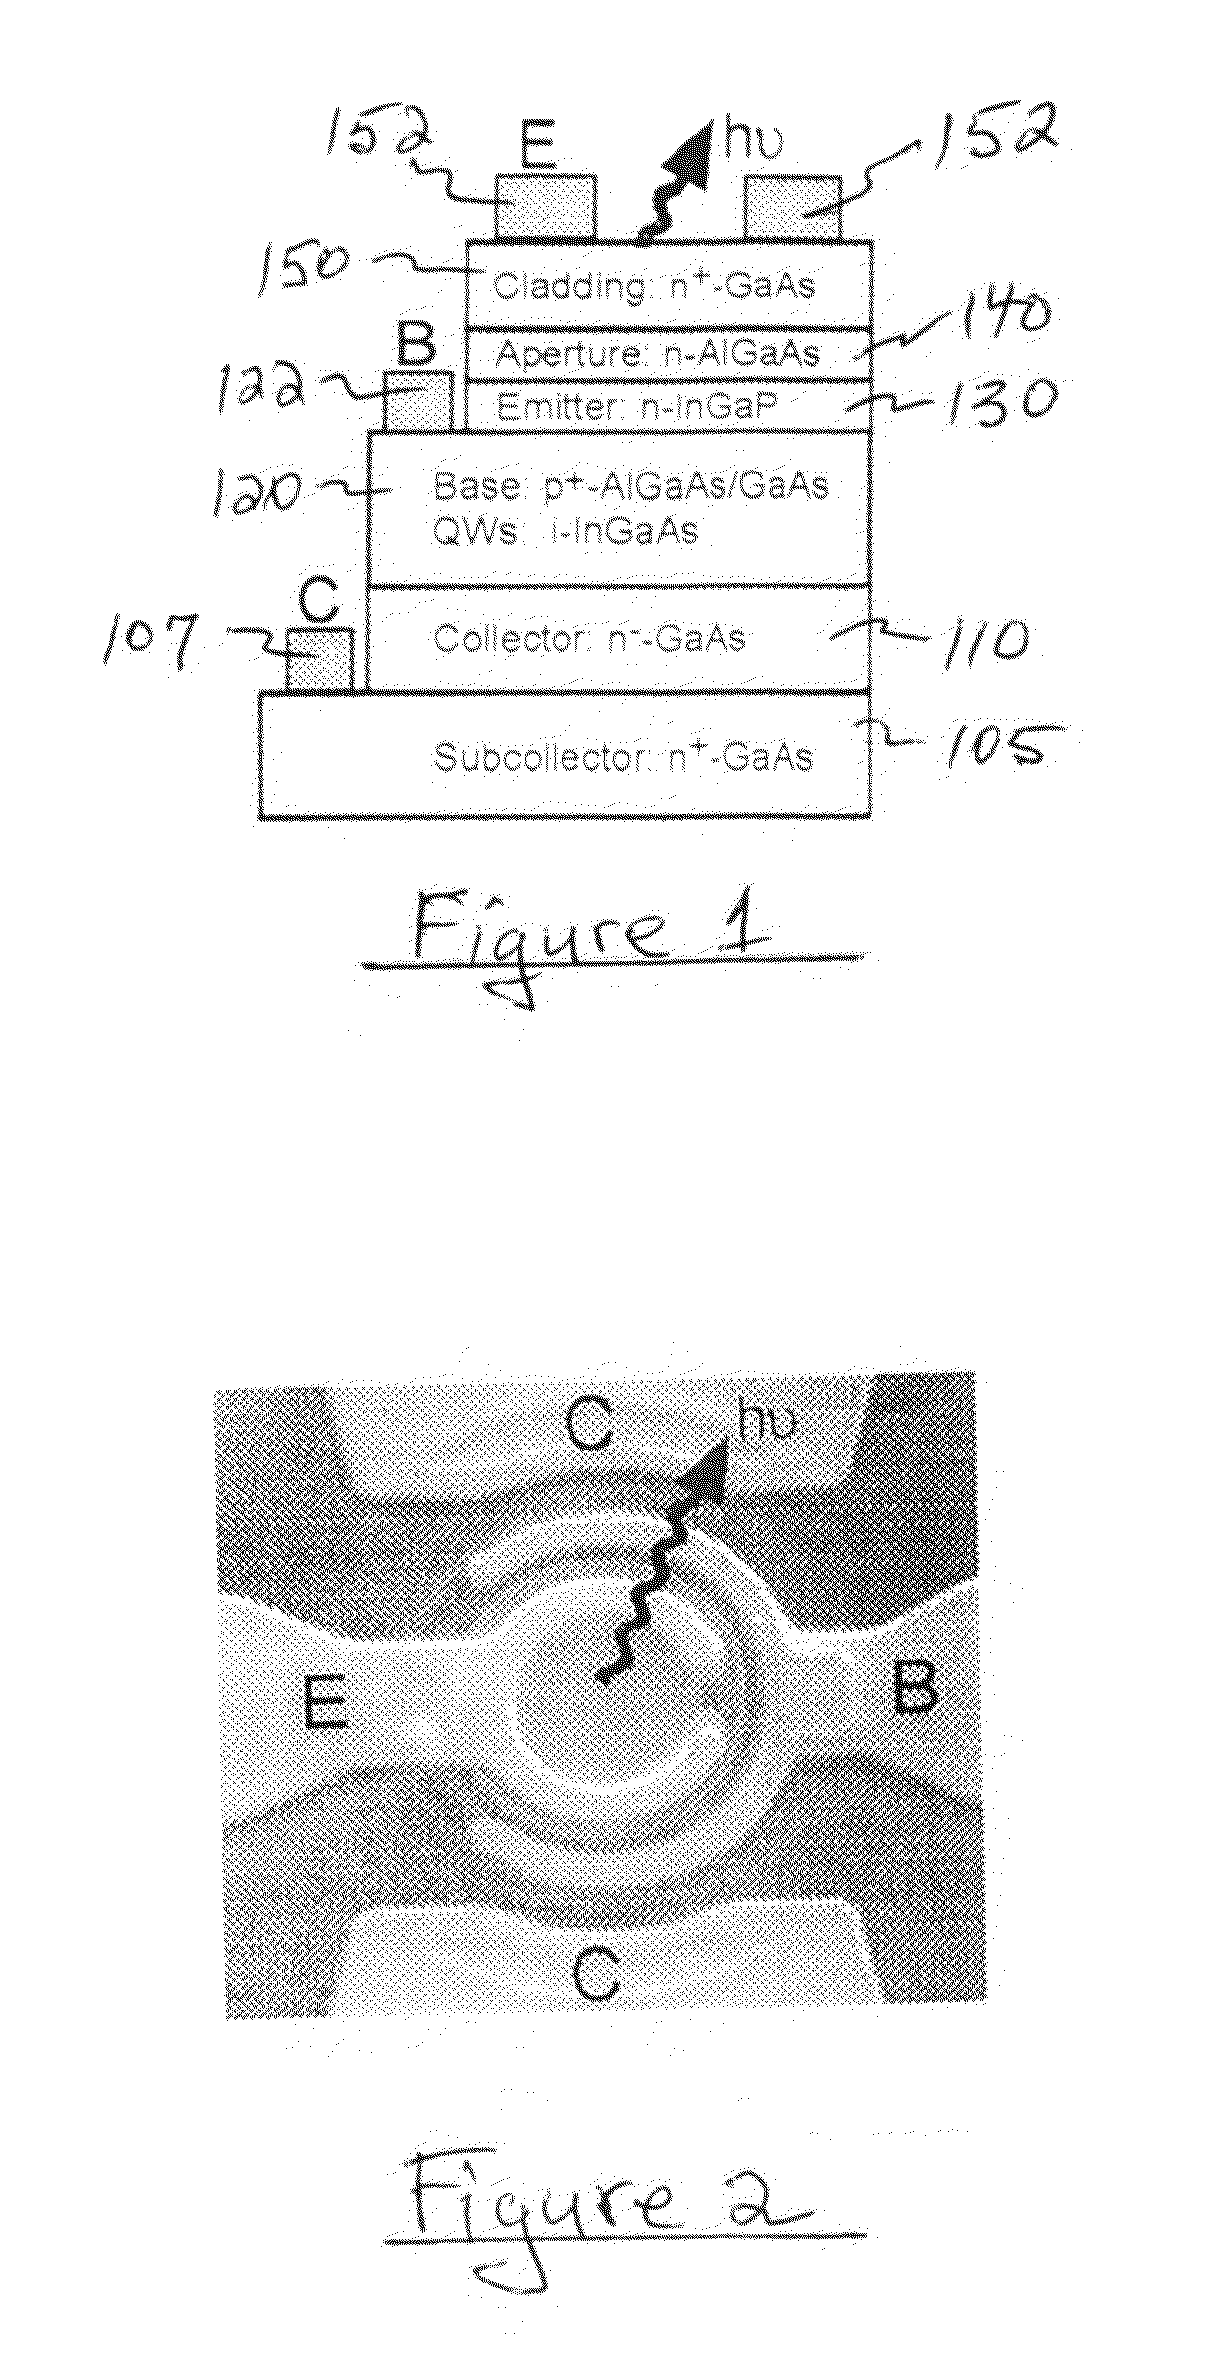 High speed light emitting semiconductor methods and devices